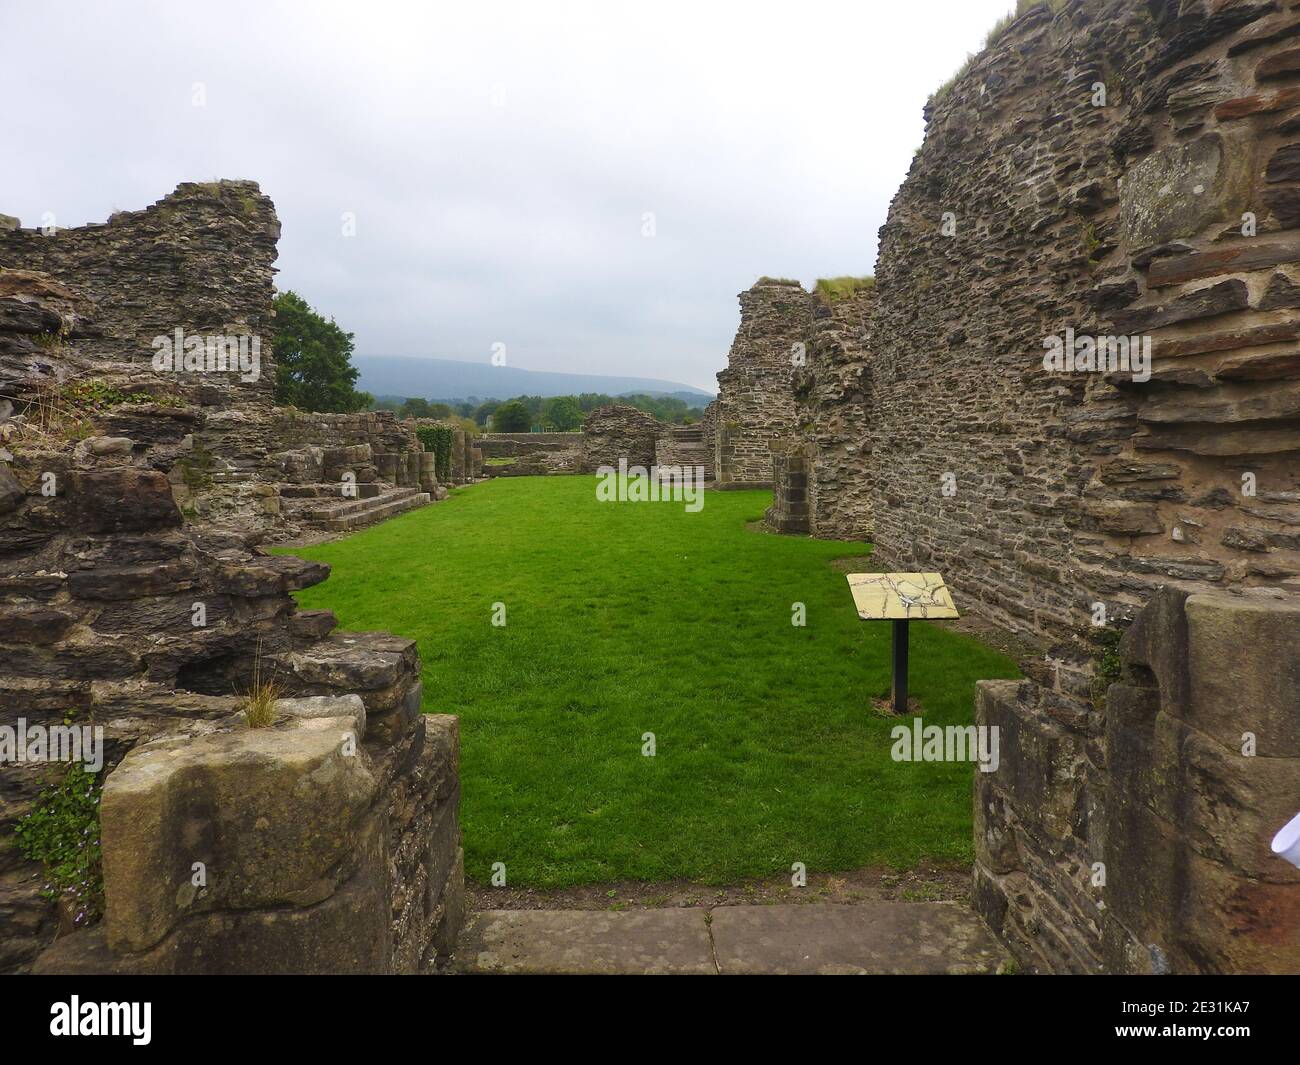 A view of the remains of Sawley Abbey,  an abbey of Cistercian monks in the village of Sawley, Lancashire,  England (  historically in the West Riding of Yorkshire). It was  a daughter-house of Newminster Abbey, Northumberland . Sawley abbey  existed from 1149 until its dissolution in 1536, during the reign of King Henry VIII.  It is controlled by English Heritage and is a Grade I listed building and Scheduled Ancient Monument. Stock Photo